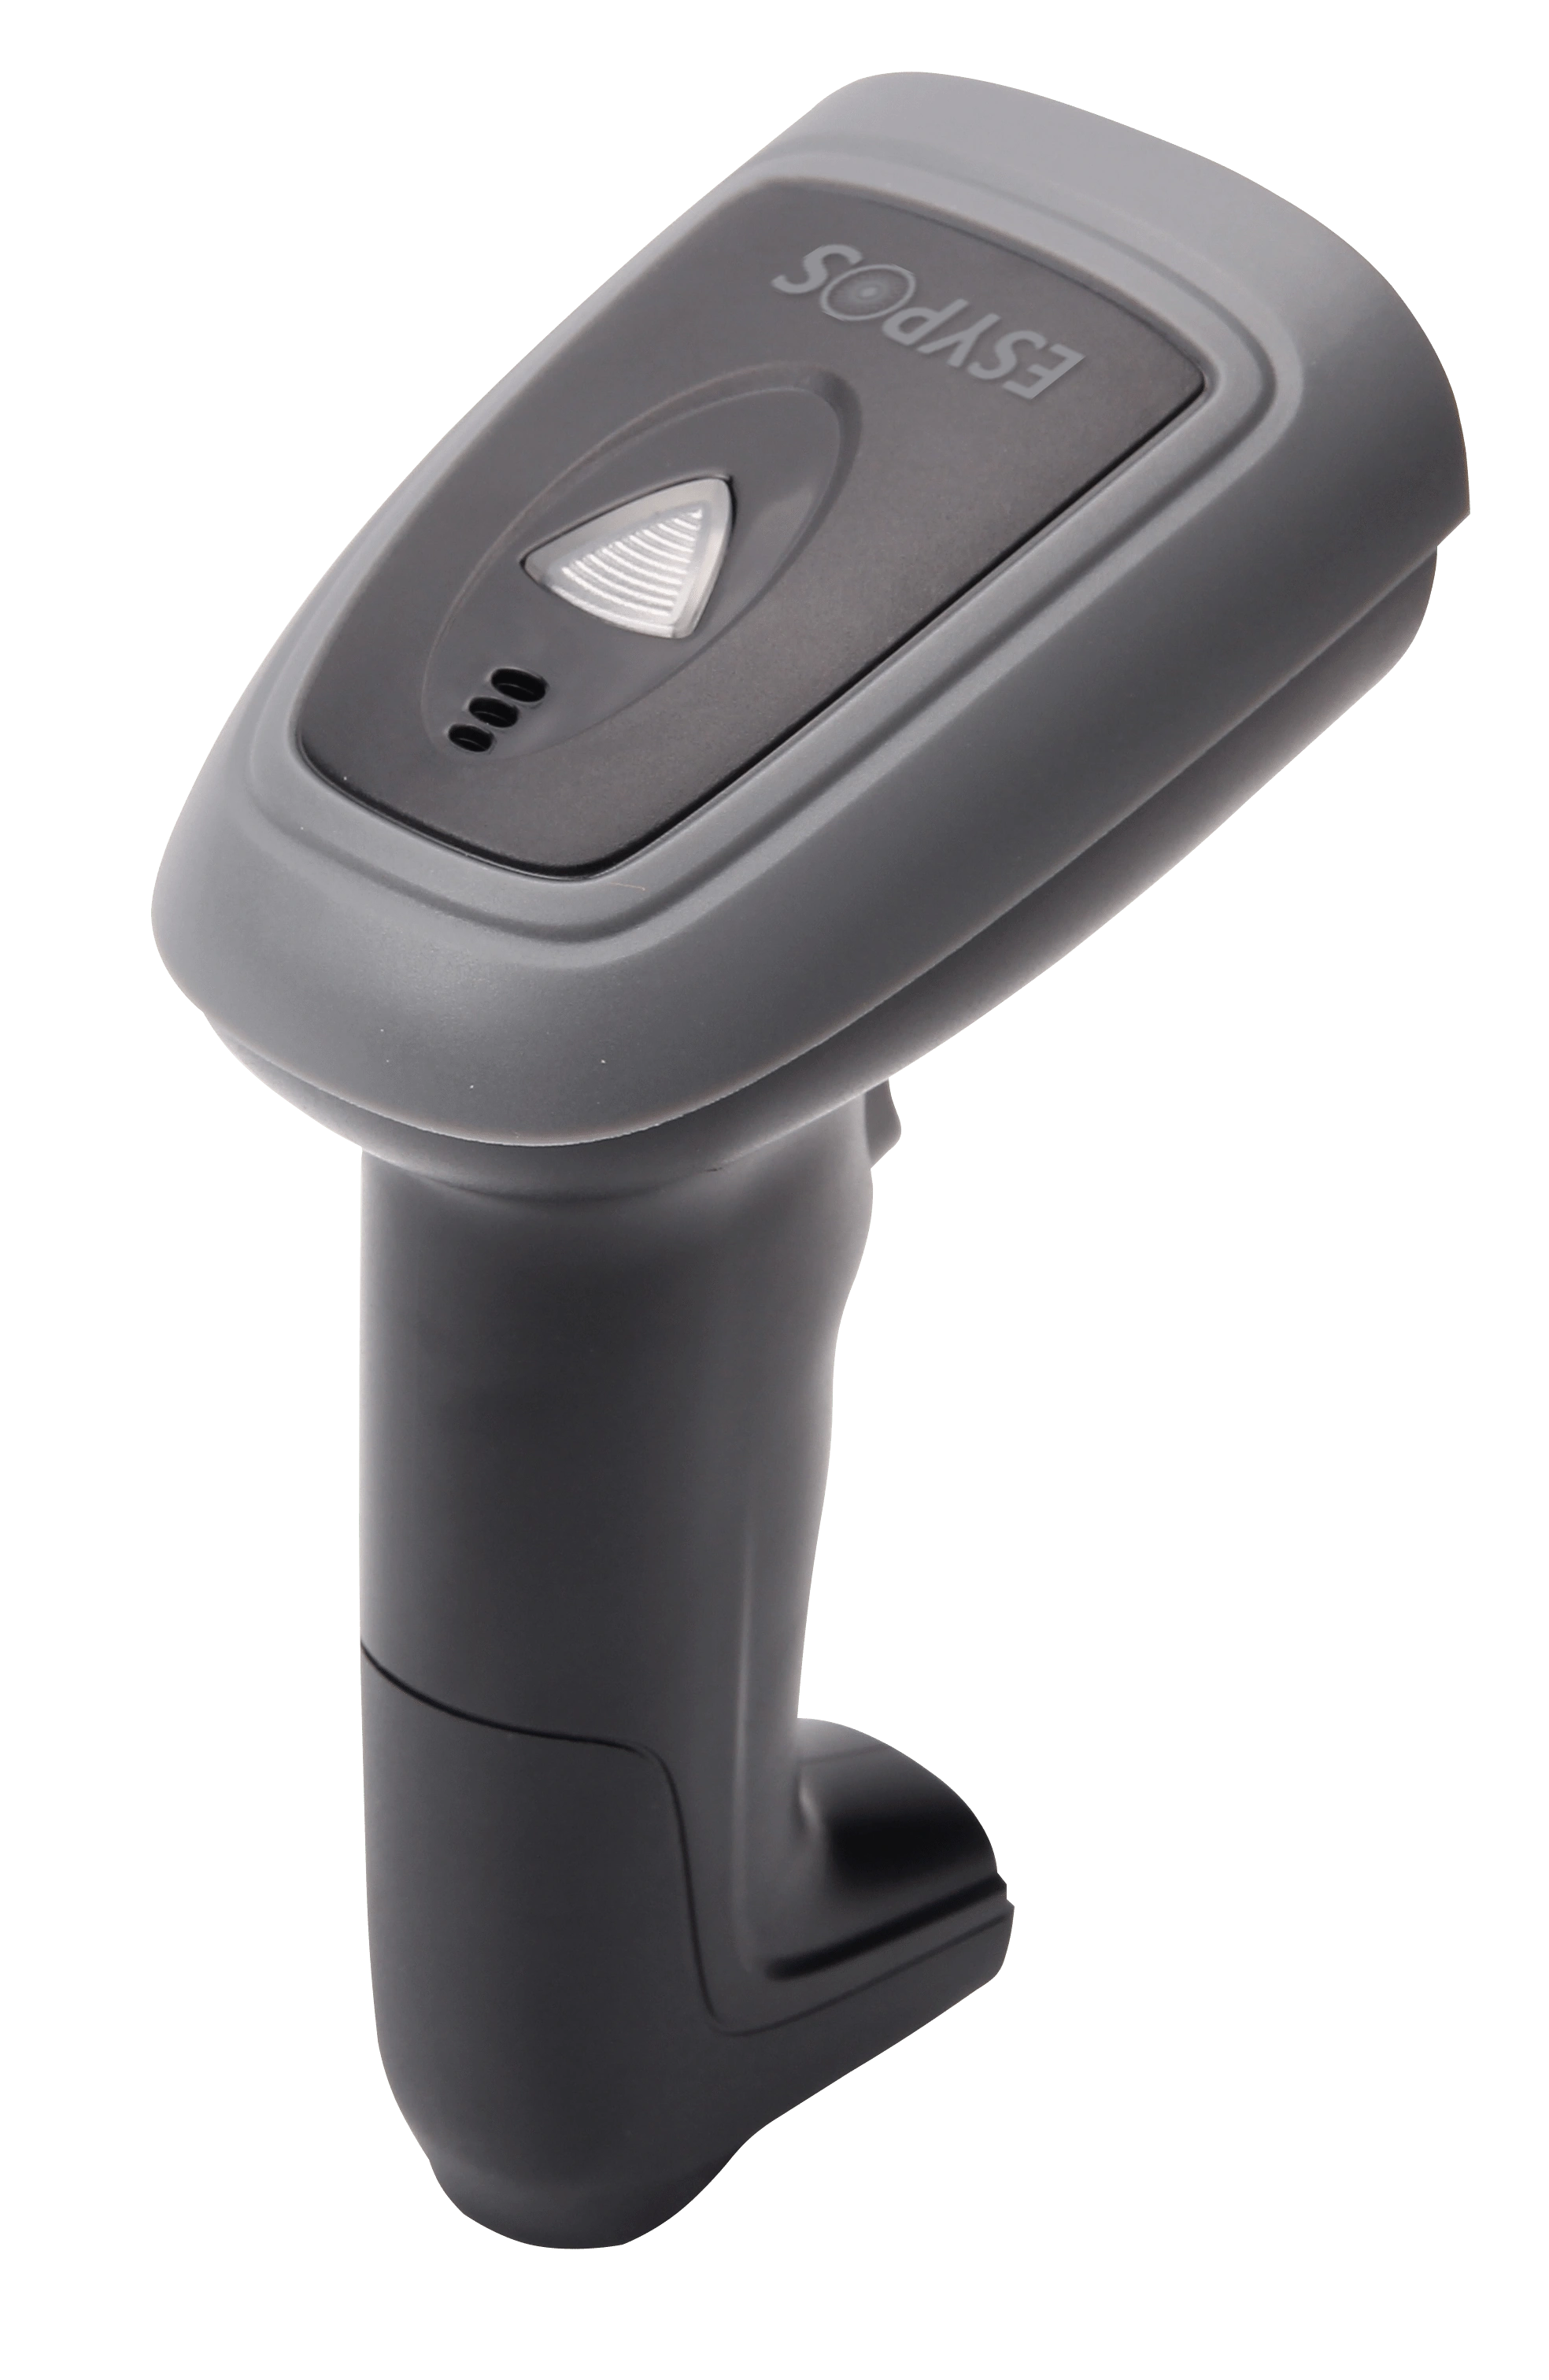 ESYPOS EBS-3312 2D WIRED BARCODE SCANNER-RSC1053